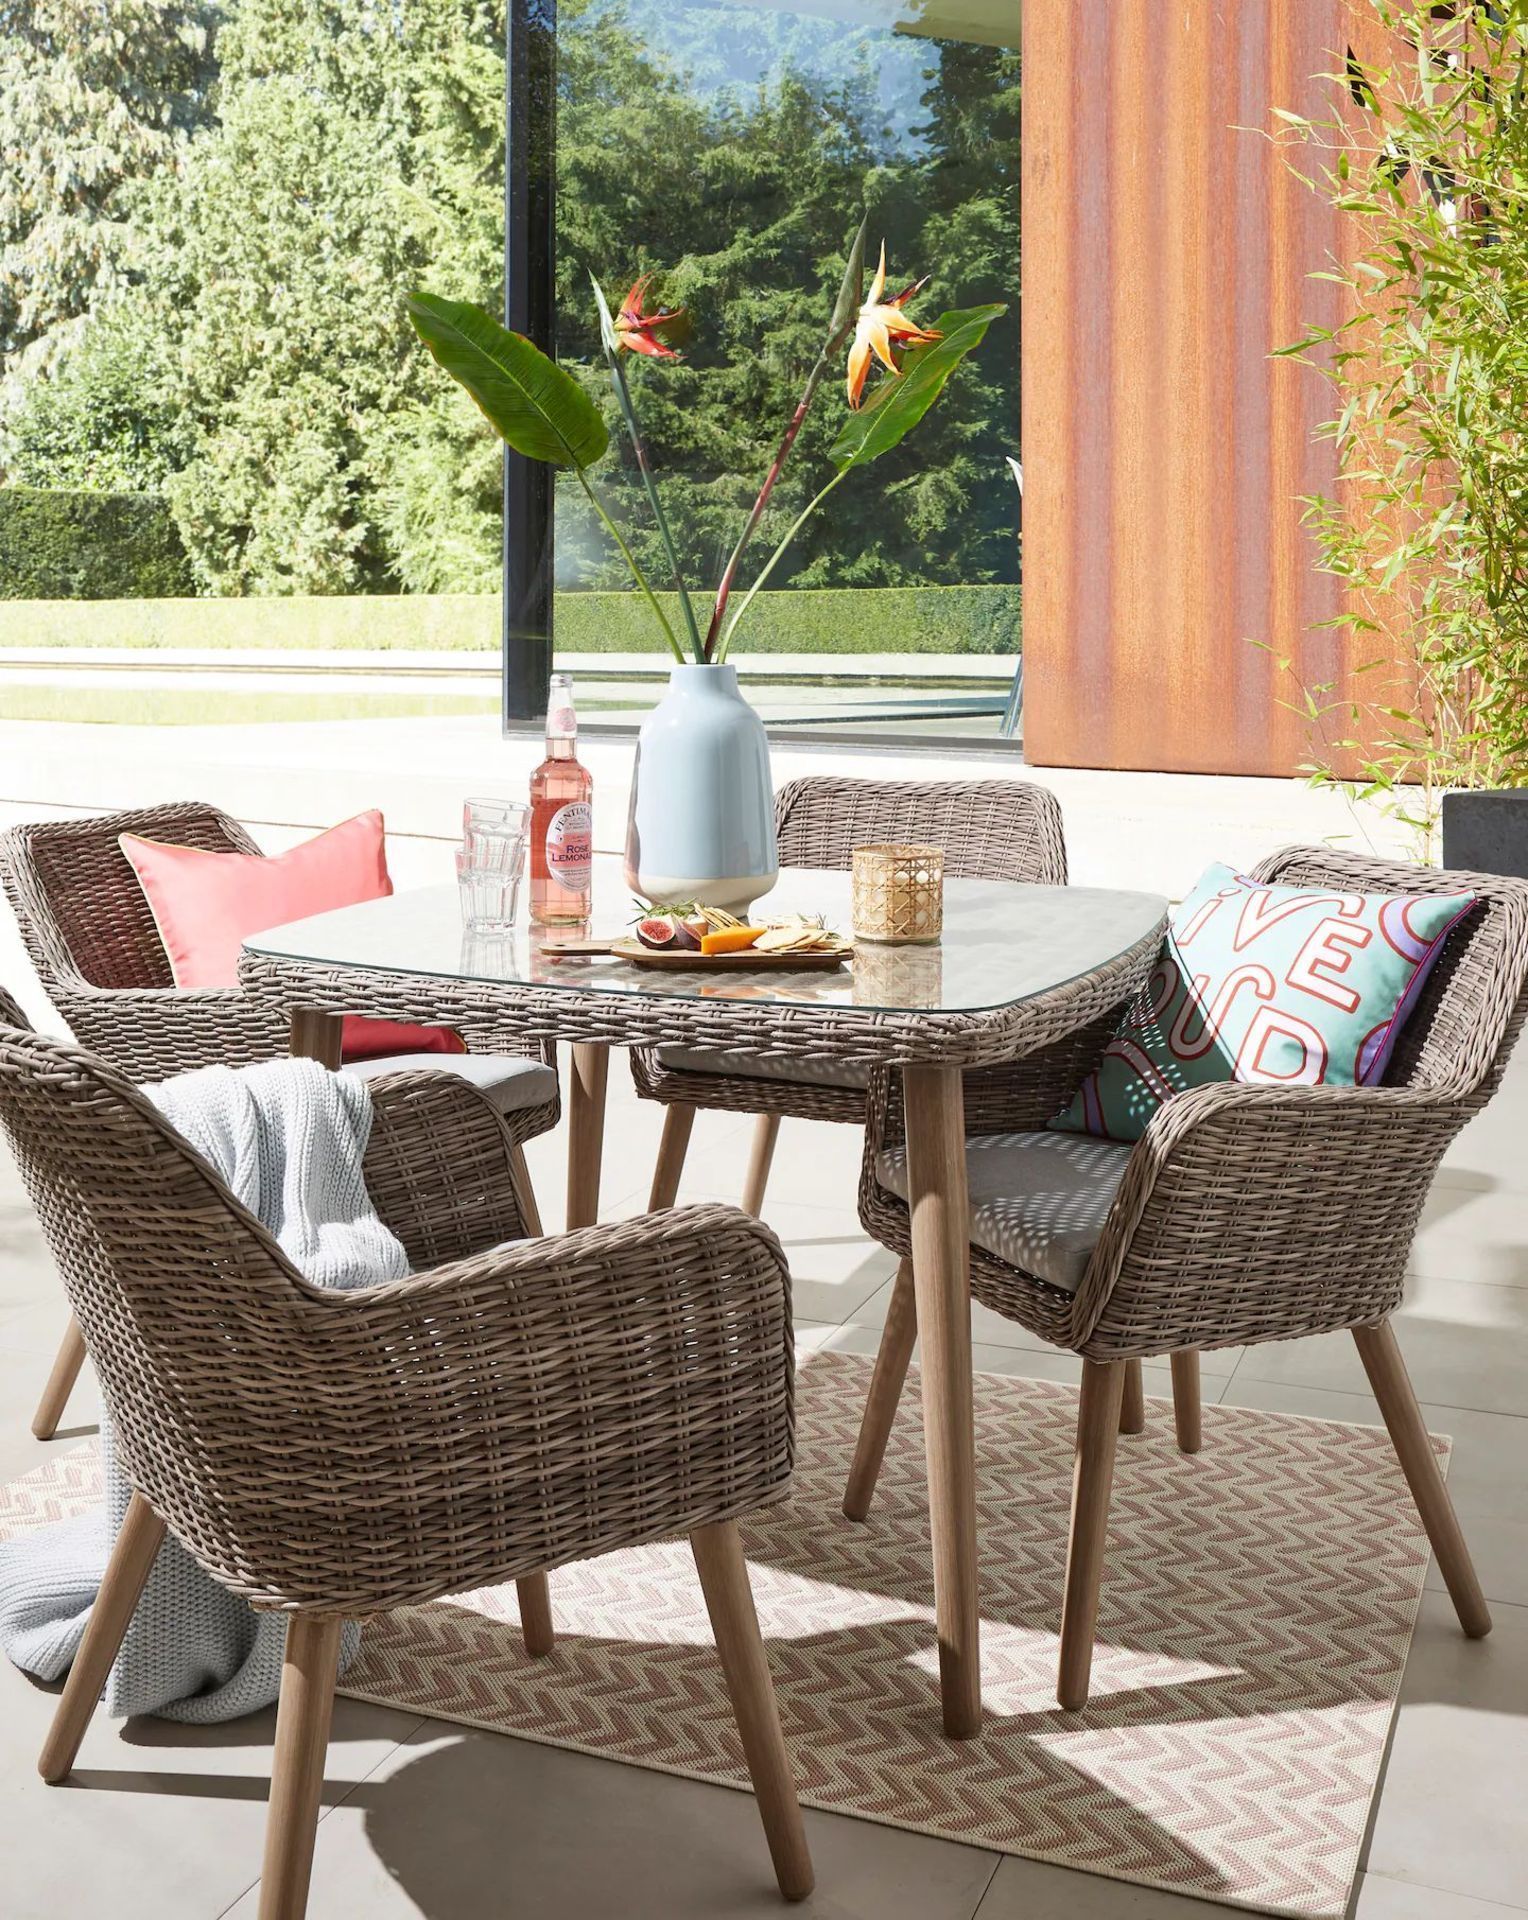 BRAND NEW Maldives 4 Seater Dining Set BLACK/NATURAL. RRP £879 EACH. This 4 seater dining set